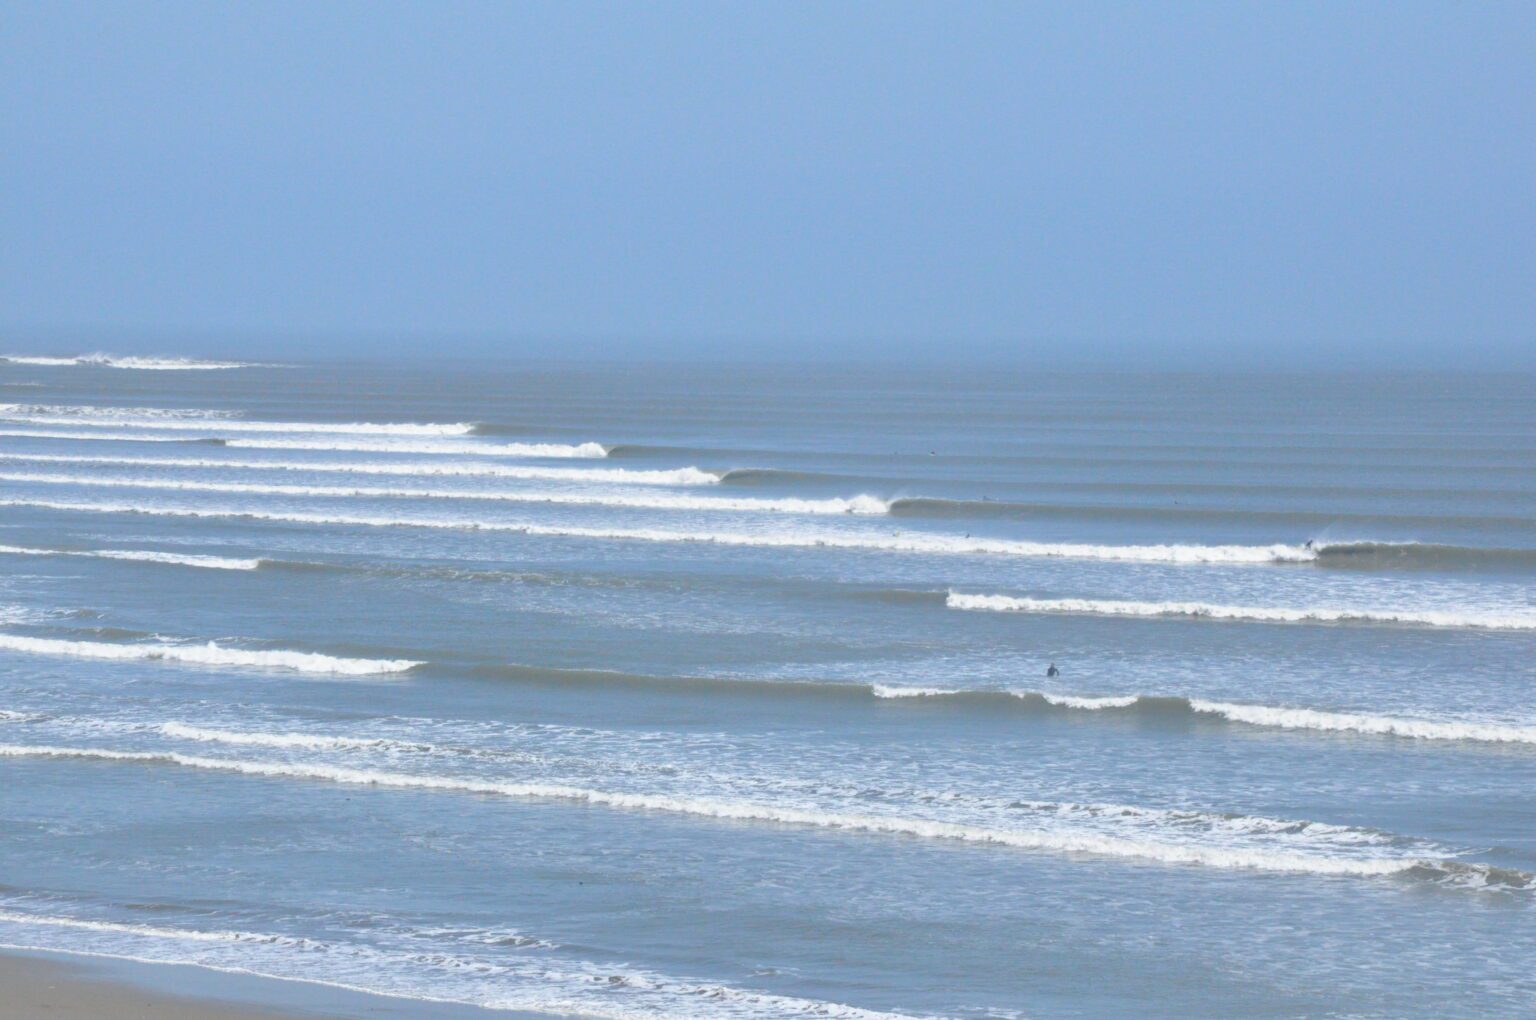 perfect waves breaking in Chicama